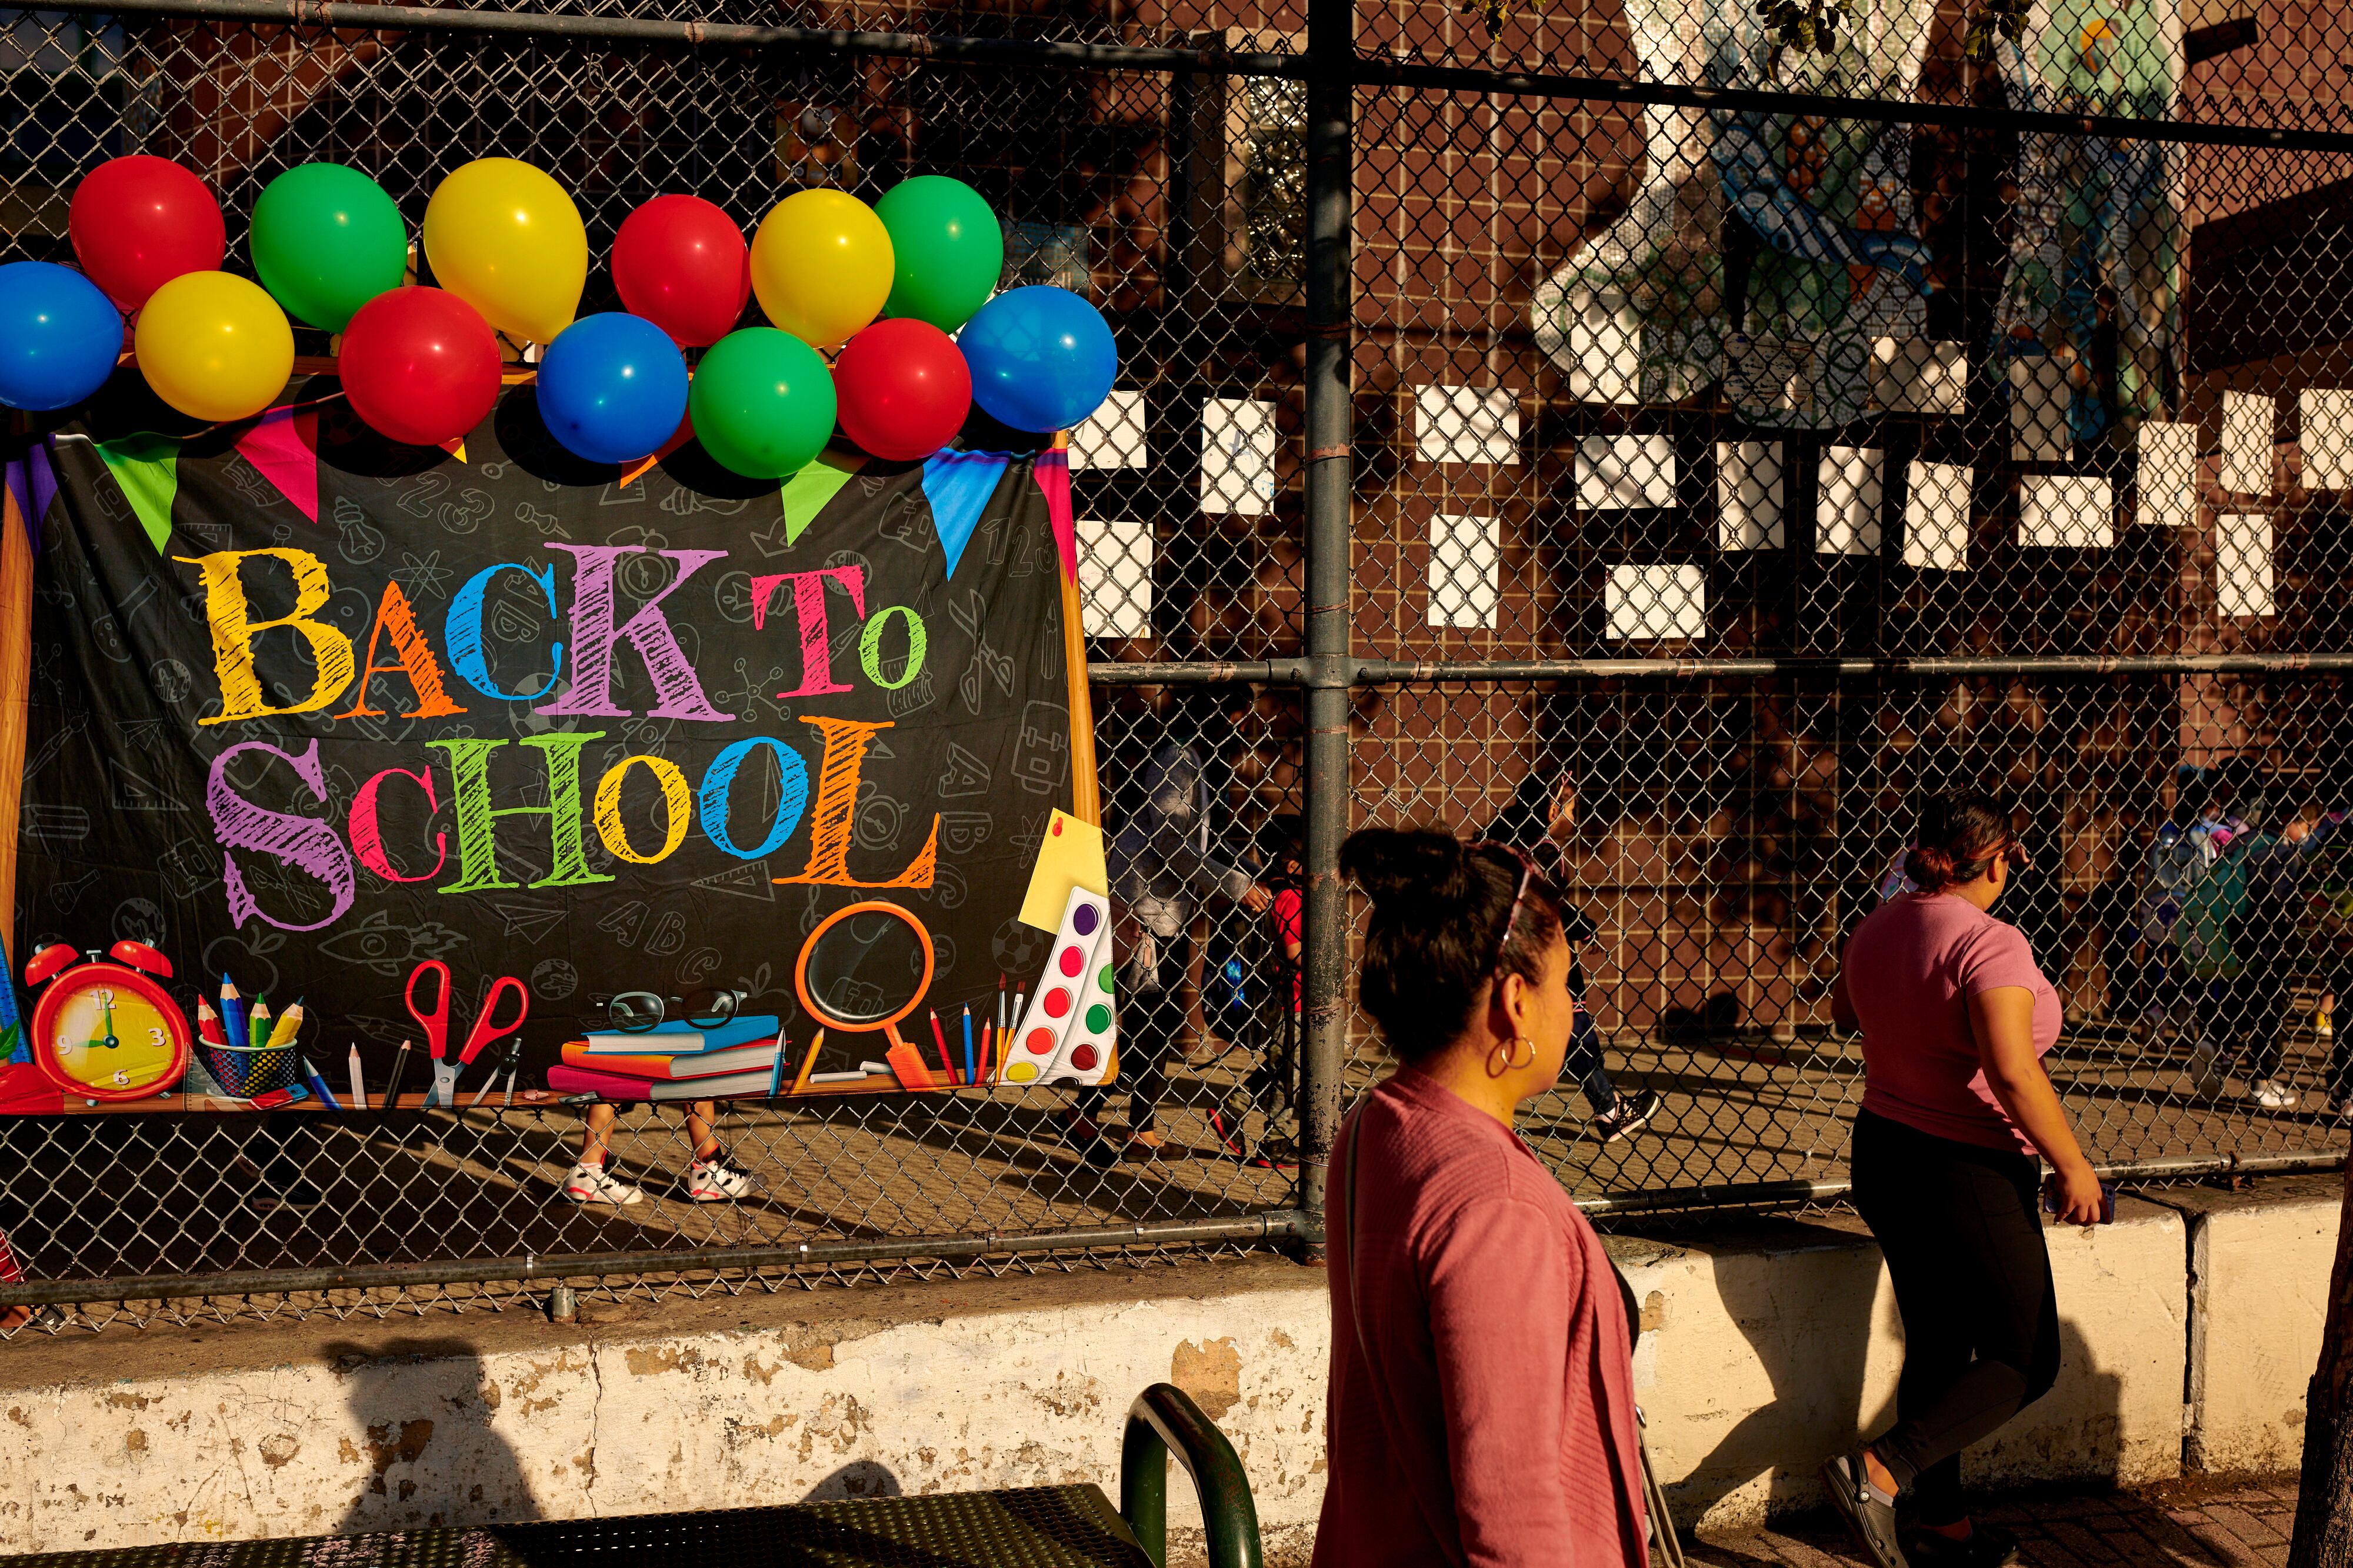 A colorful ‘Welcome back to school’ sign is posted on a fence in front of a brick building.